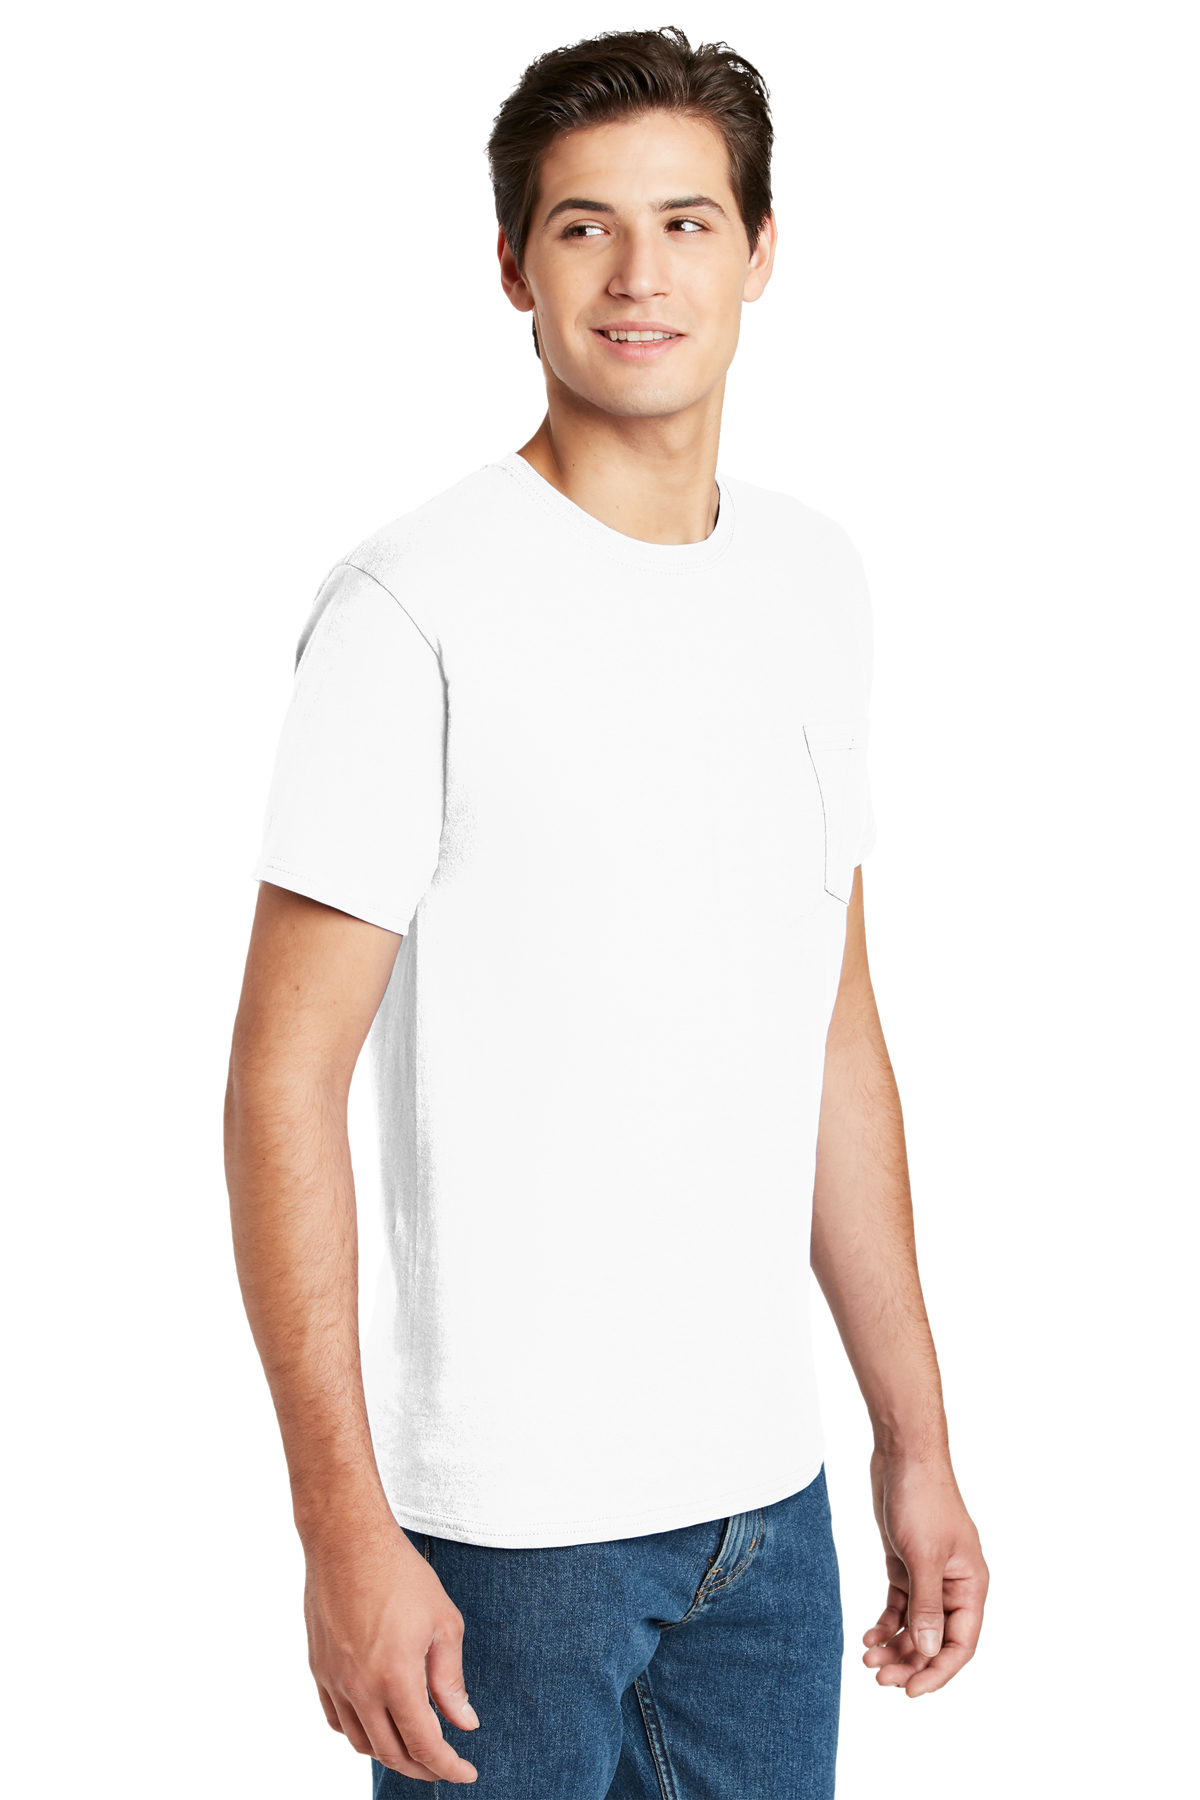 Hanes - Authentic 100% Cotton T-Shirt with Pocket | Product | SanMar